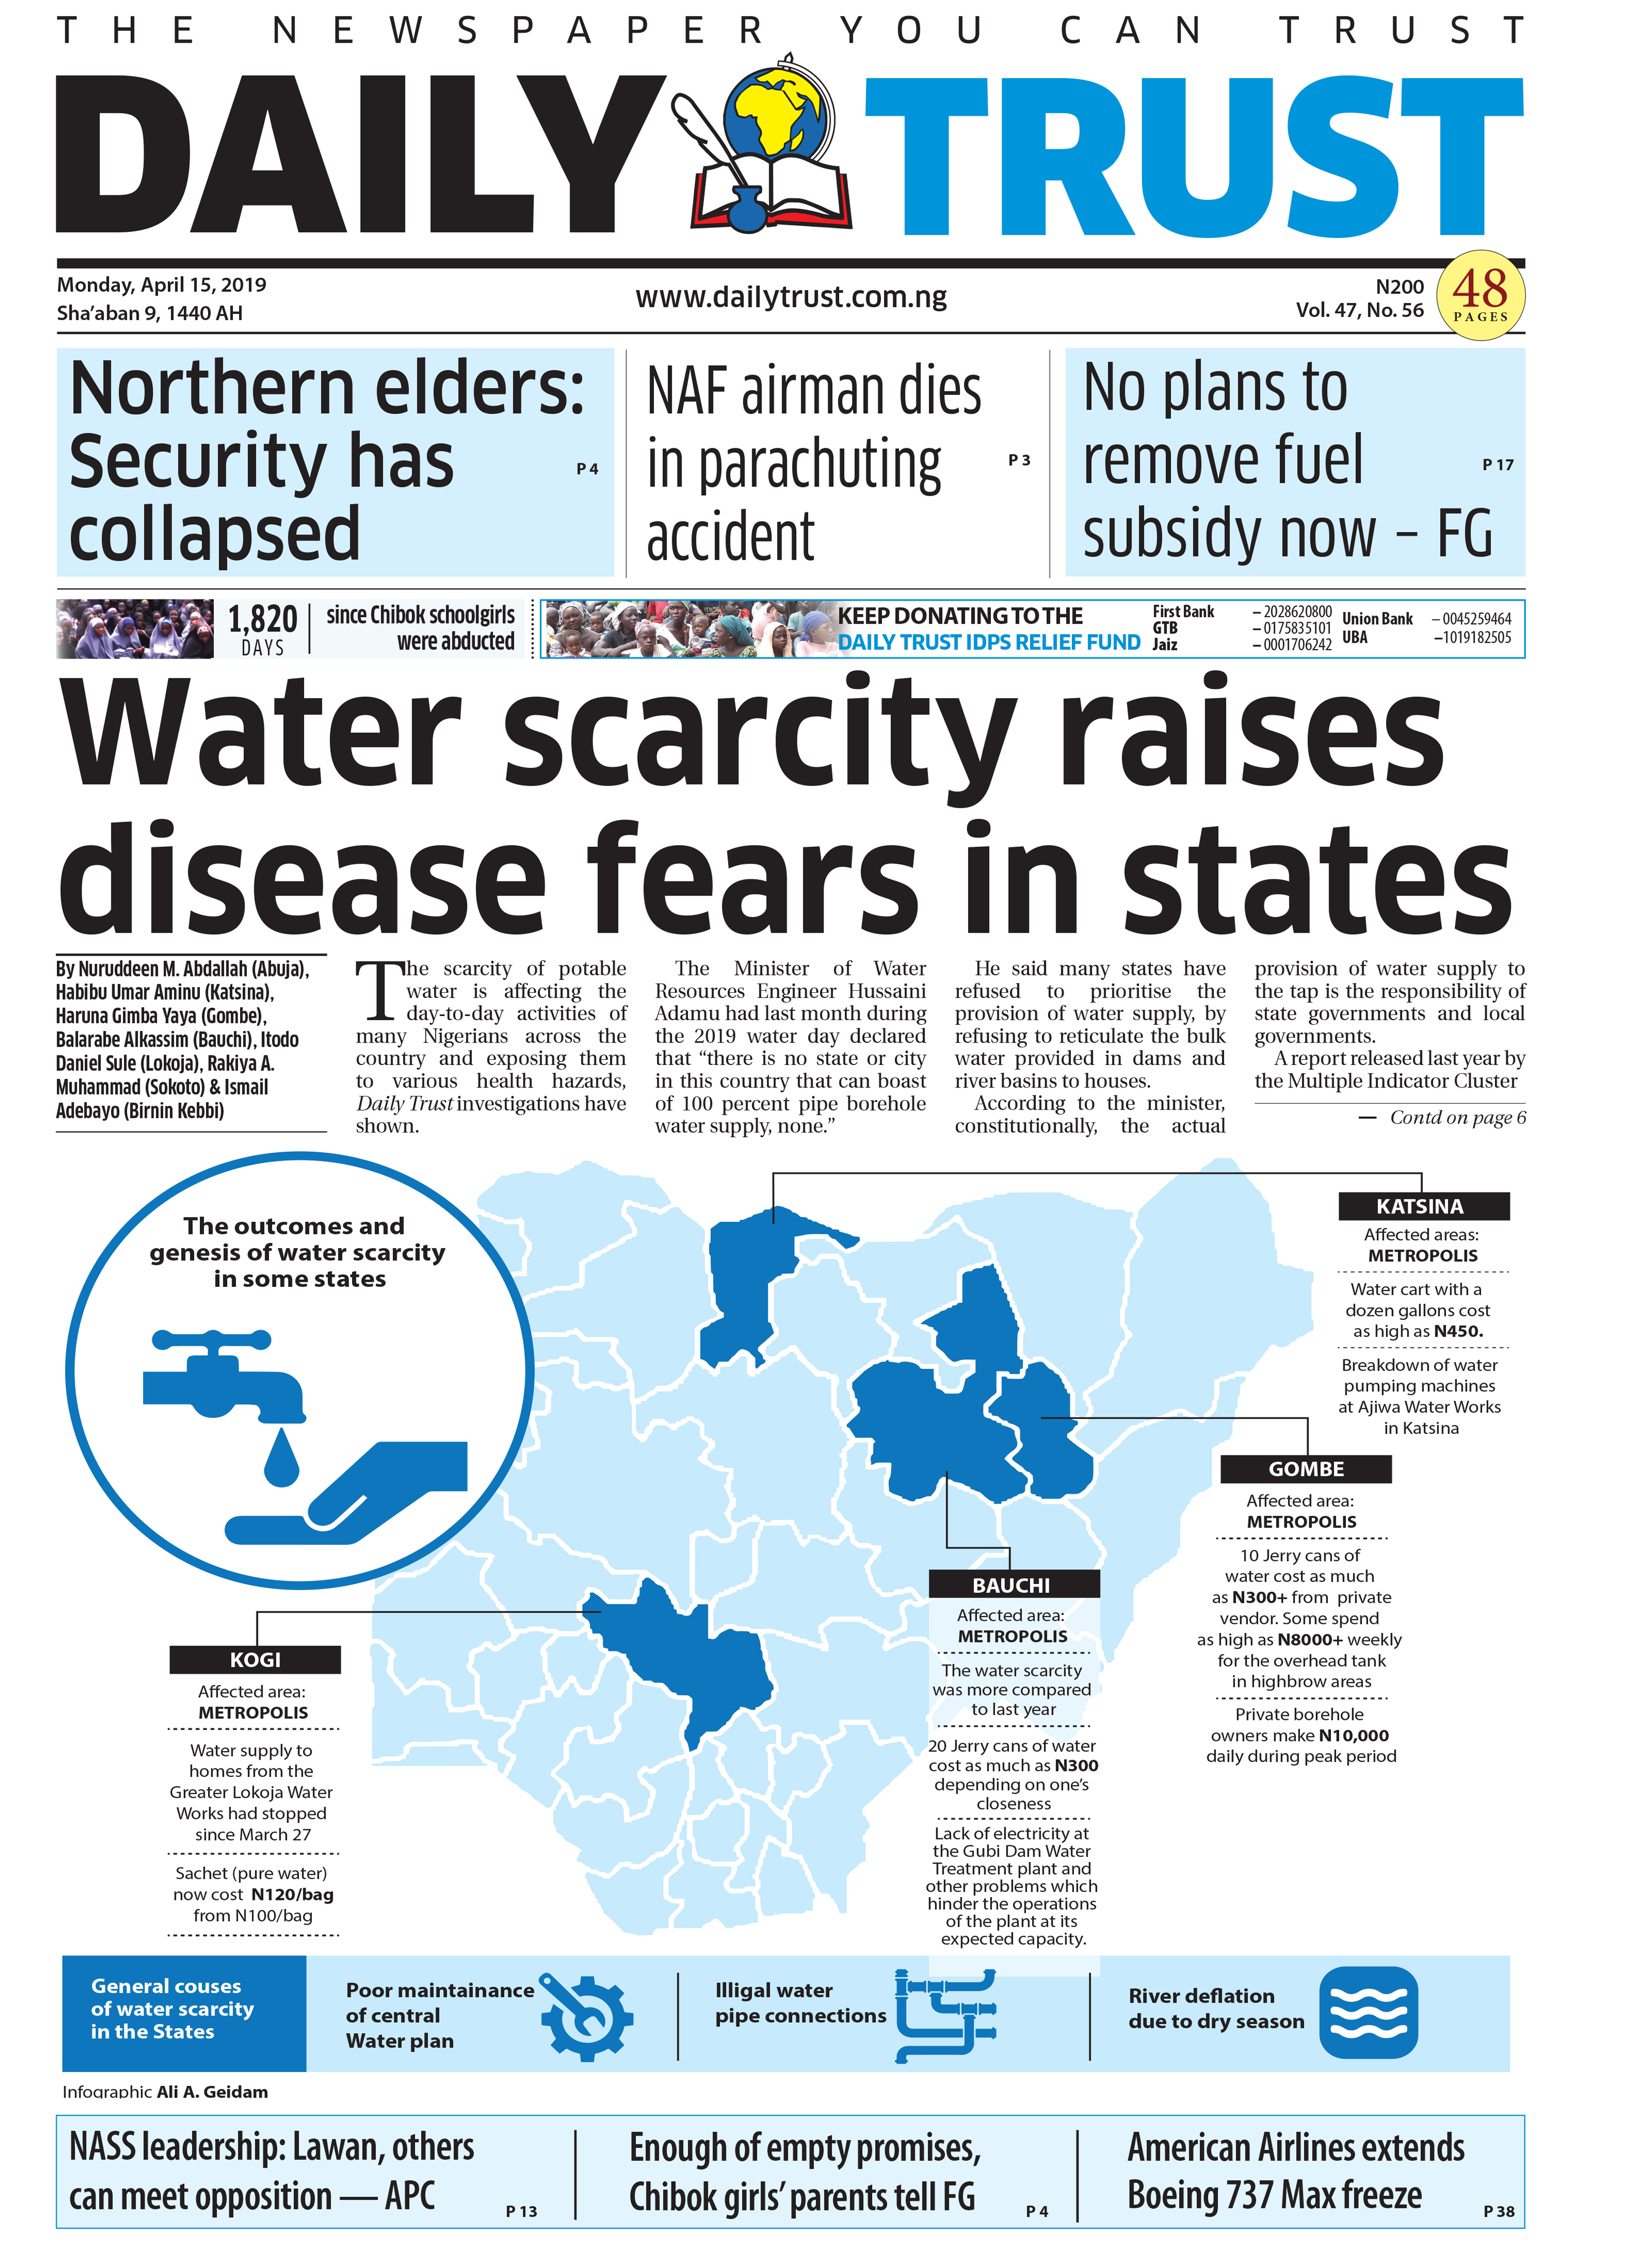 Daily Trust front cover